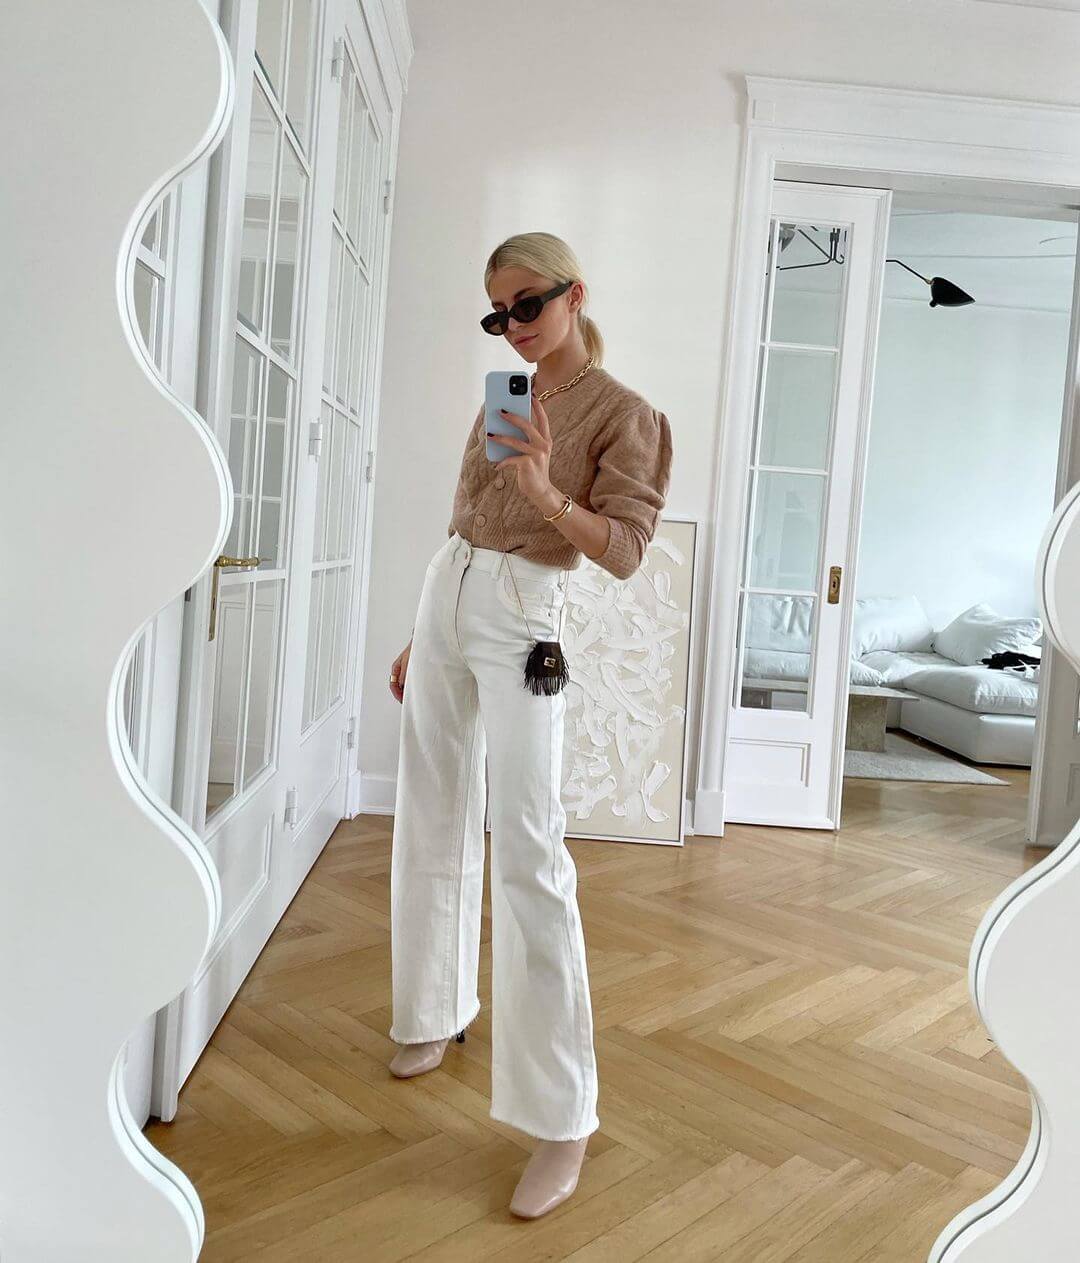 10 Refreshing Ways To Wear White Jeans After Labor Day